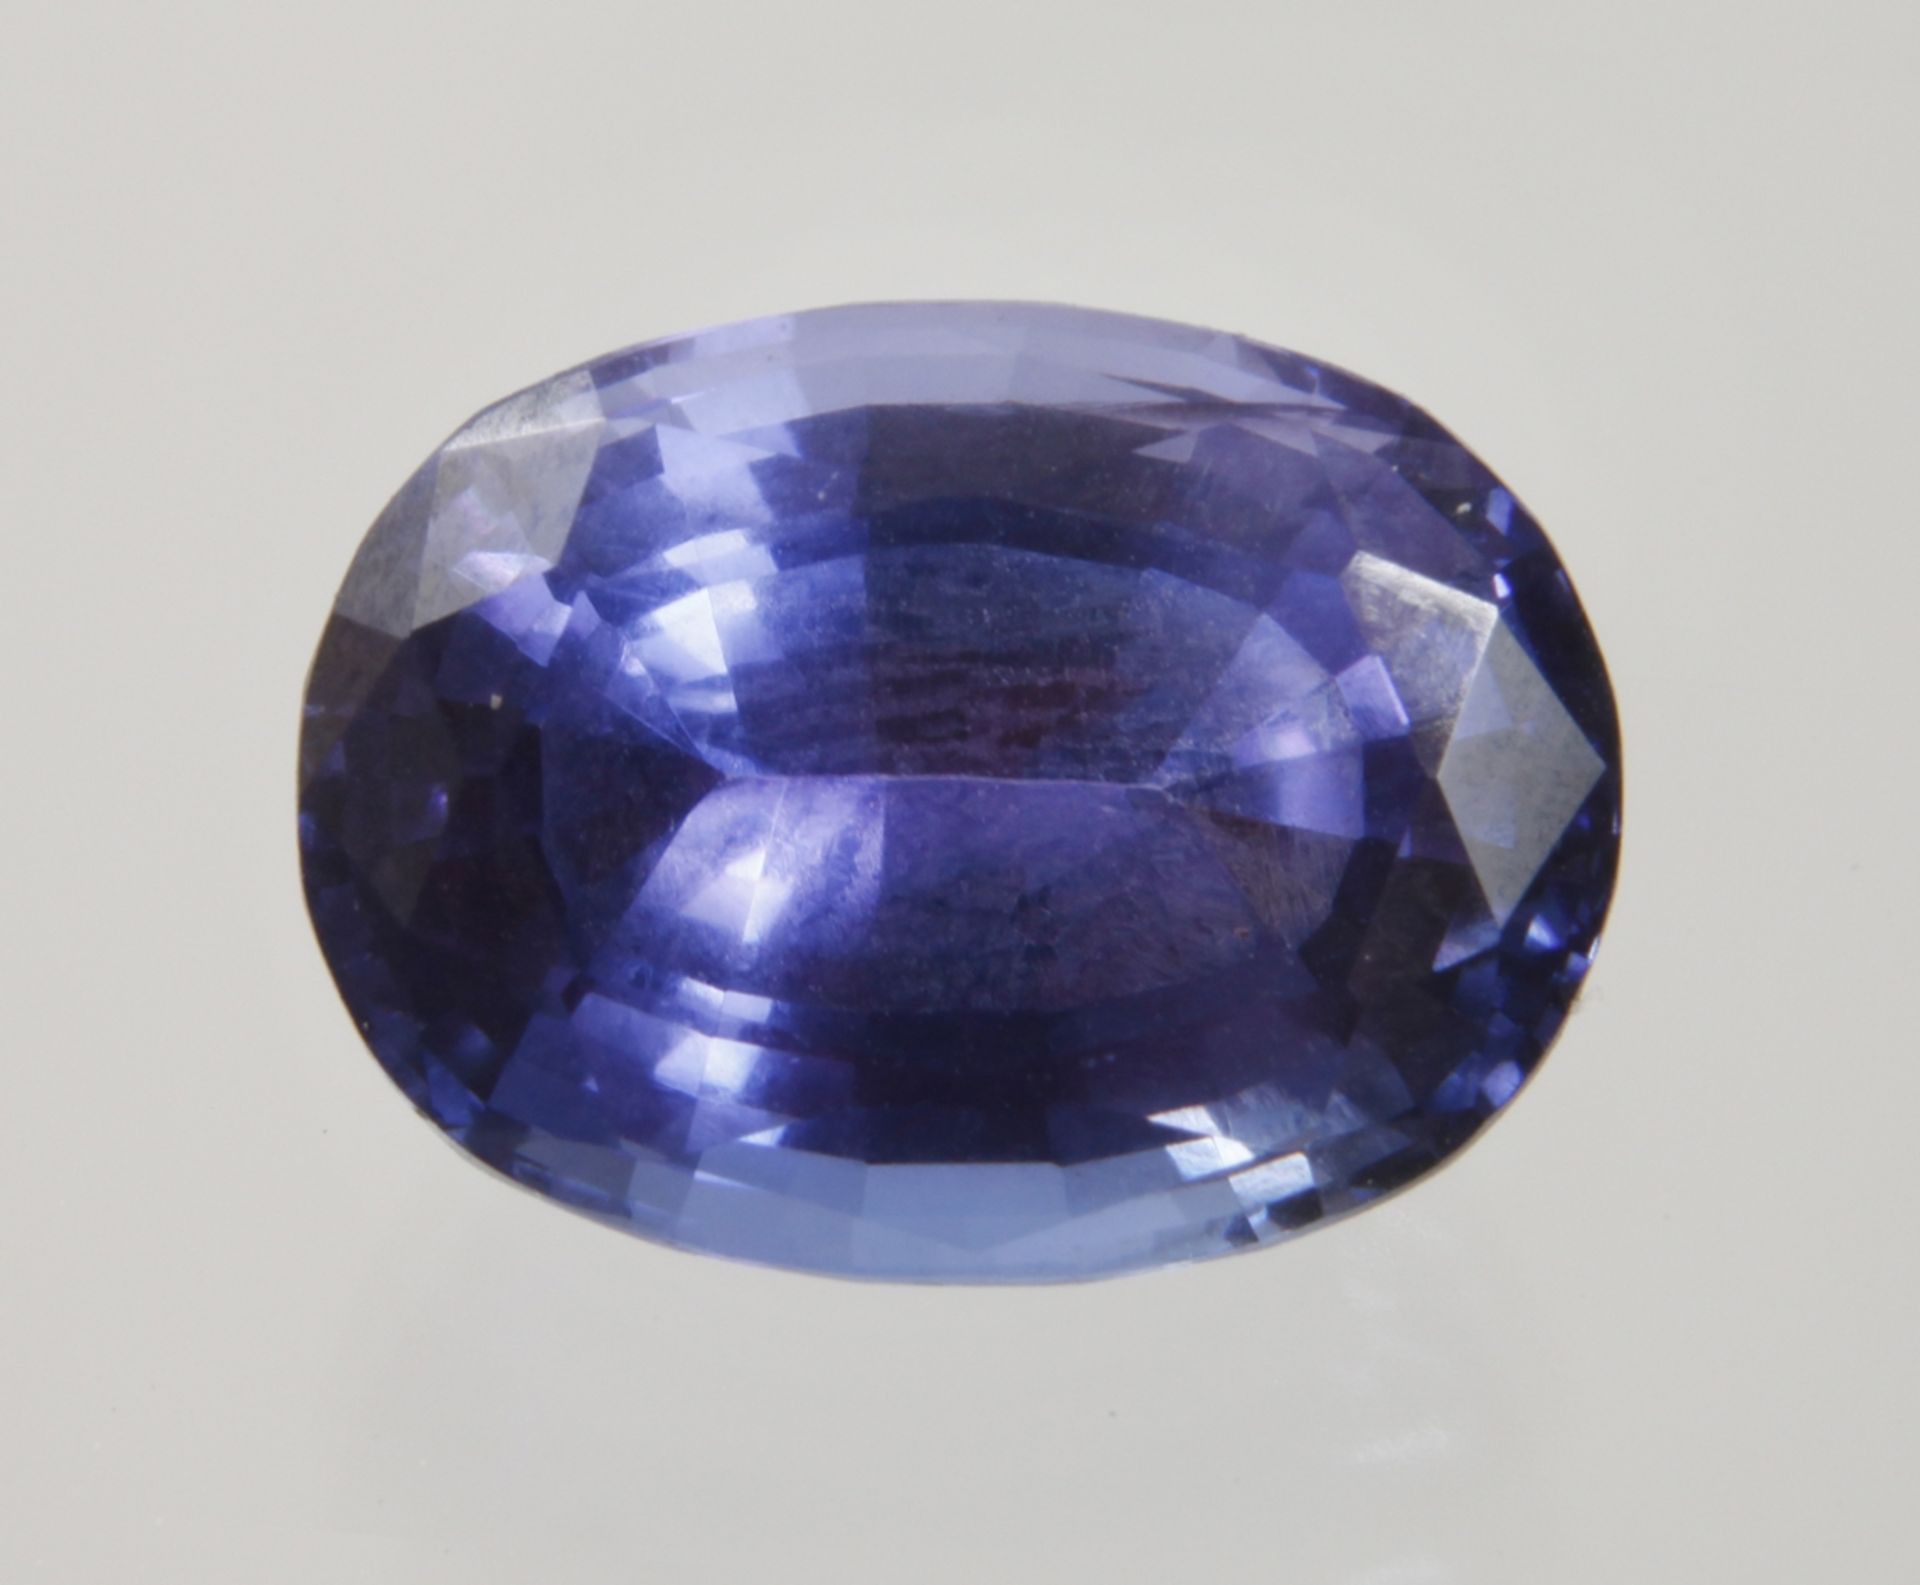 Facetted tanzanite of 8.8 ct